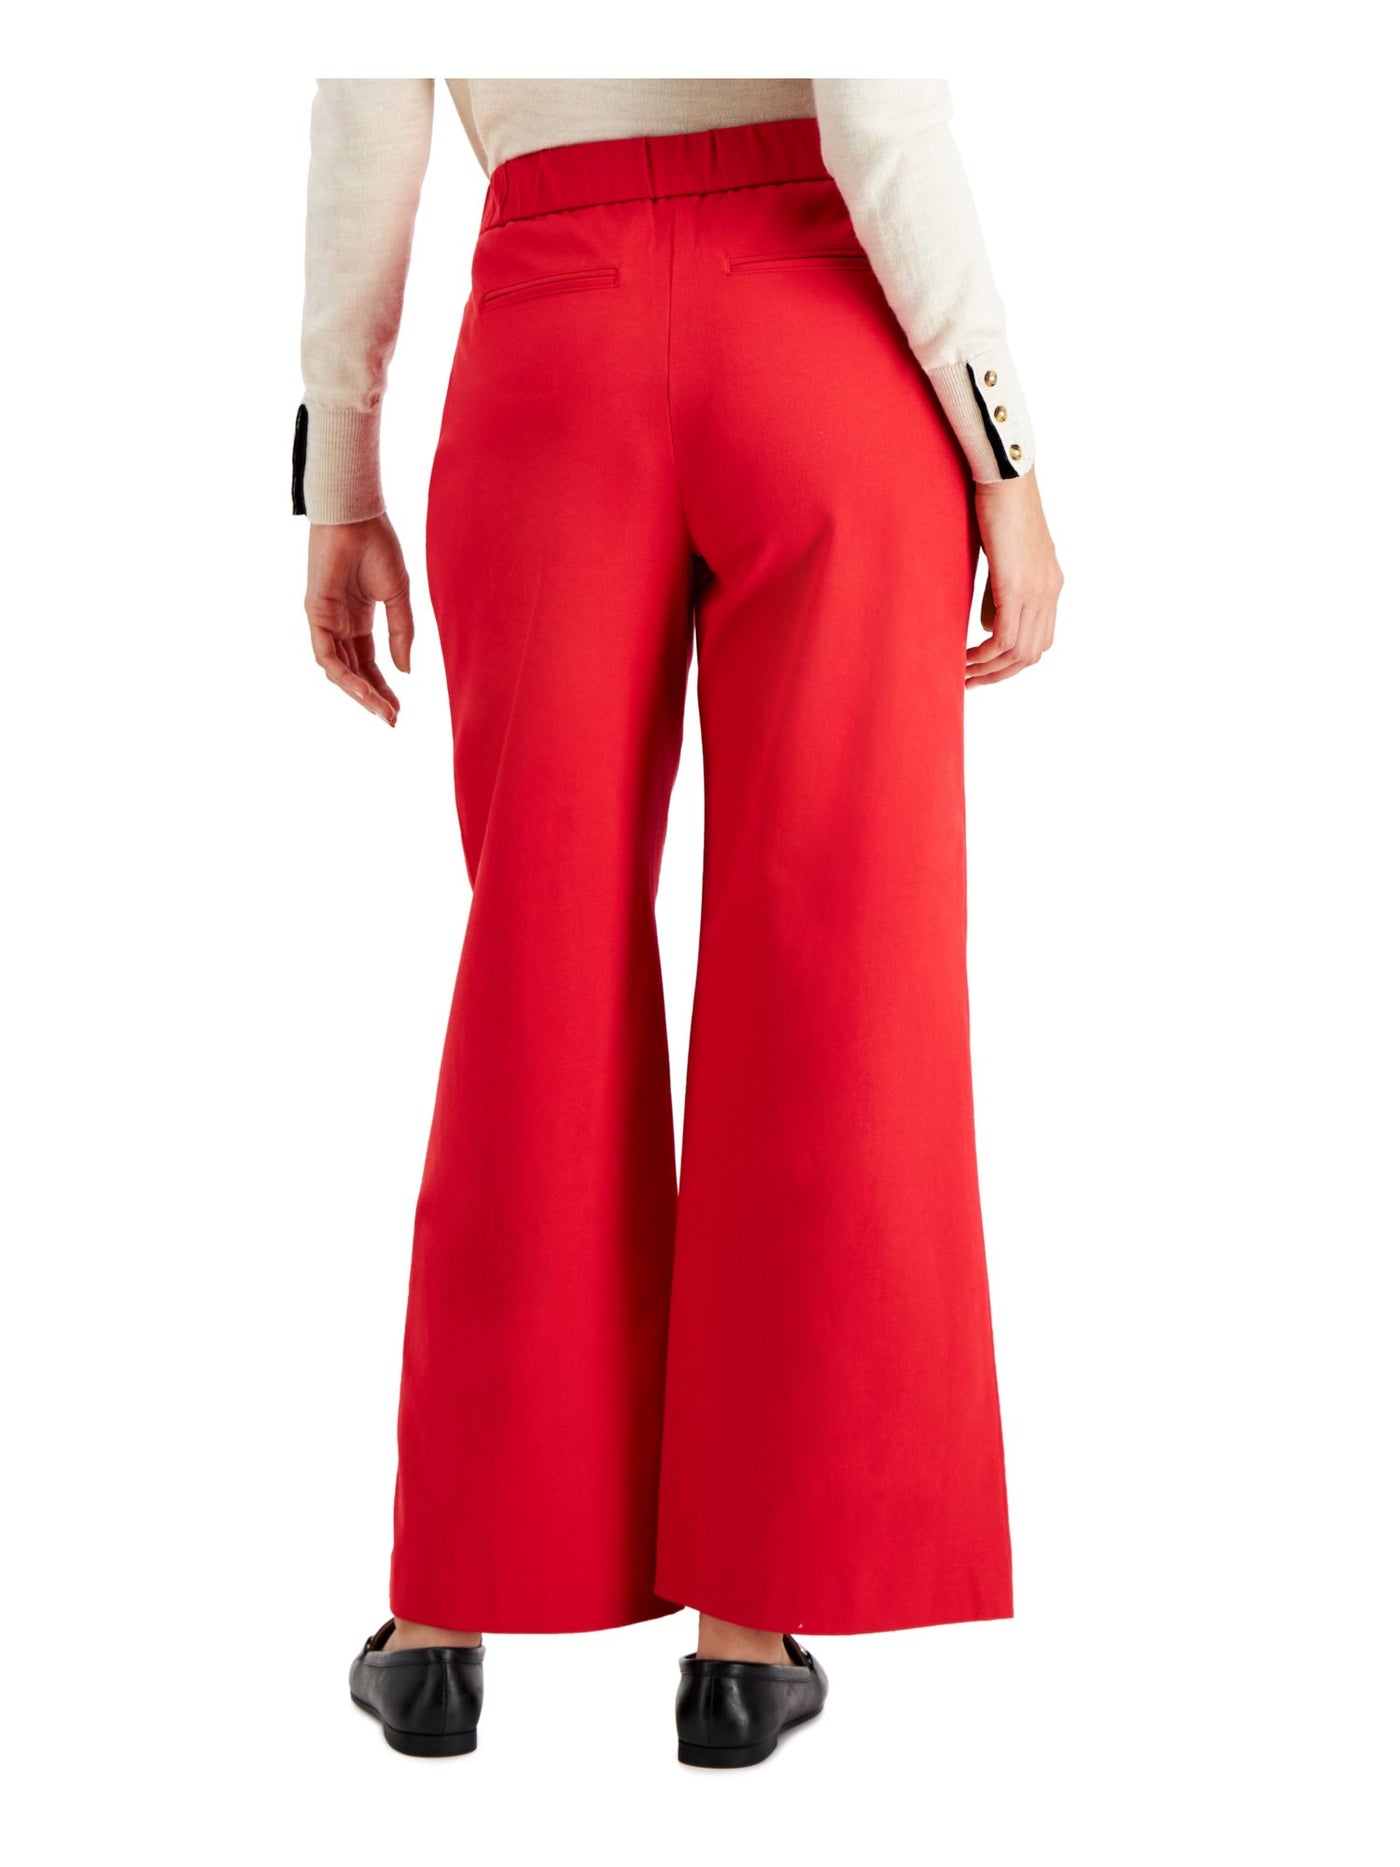 CHARTER CLUB Womens Red Stretch Pleated Pocketed Button Fly Wear To Work Wide Leg Pants 16